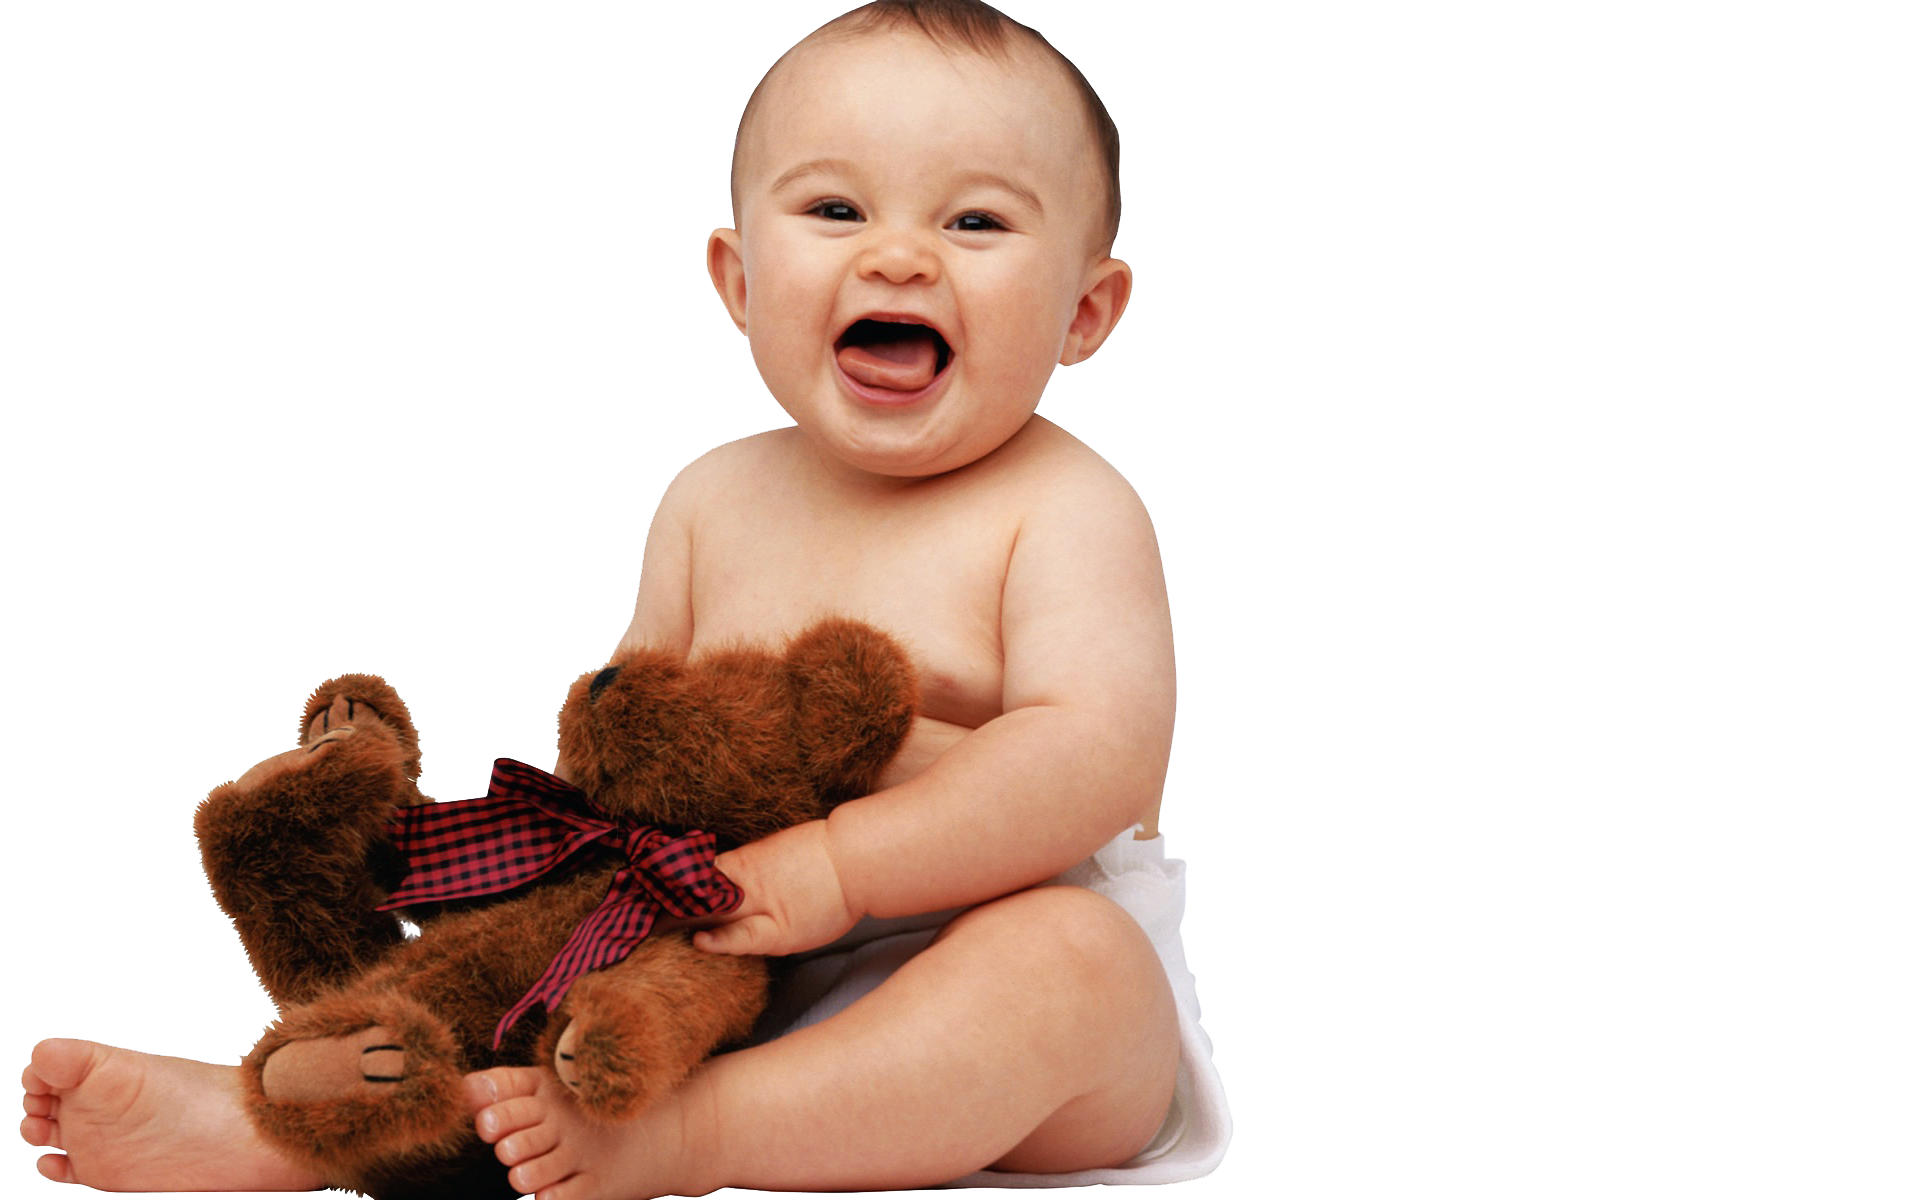 Baby PNG Image